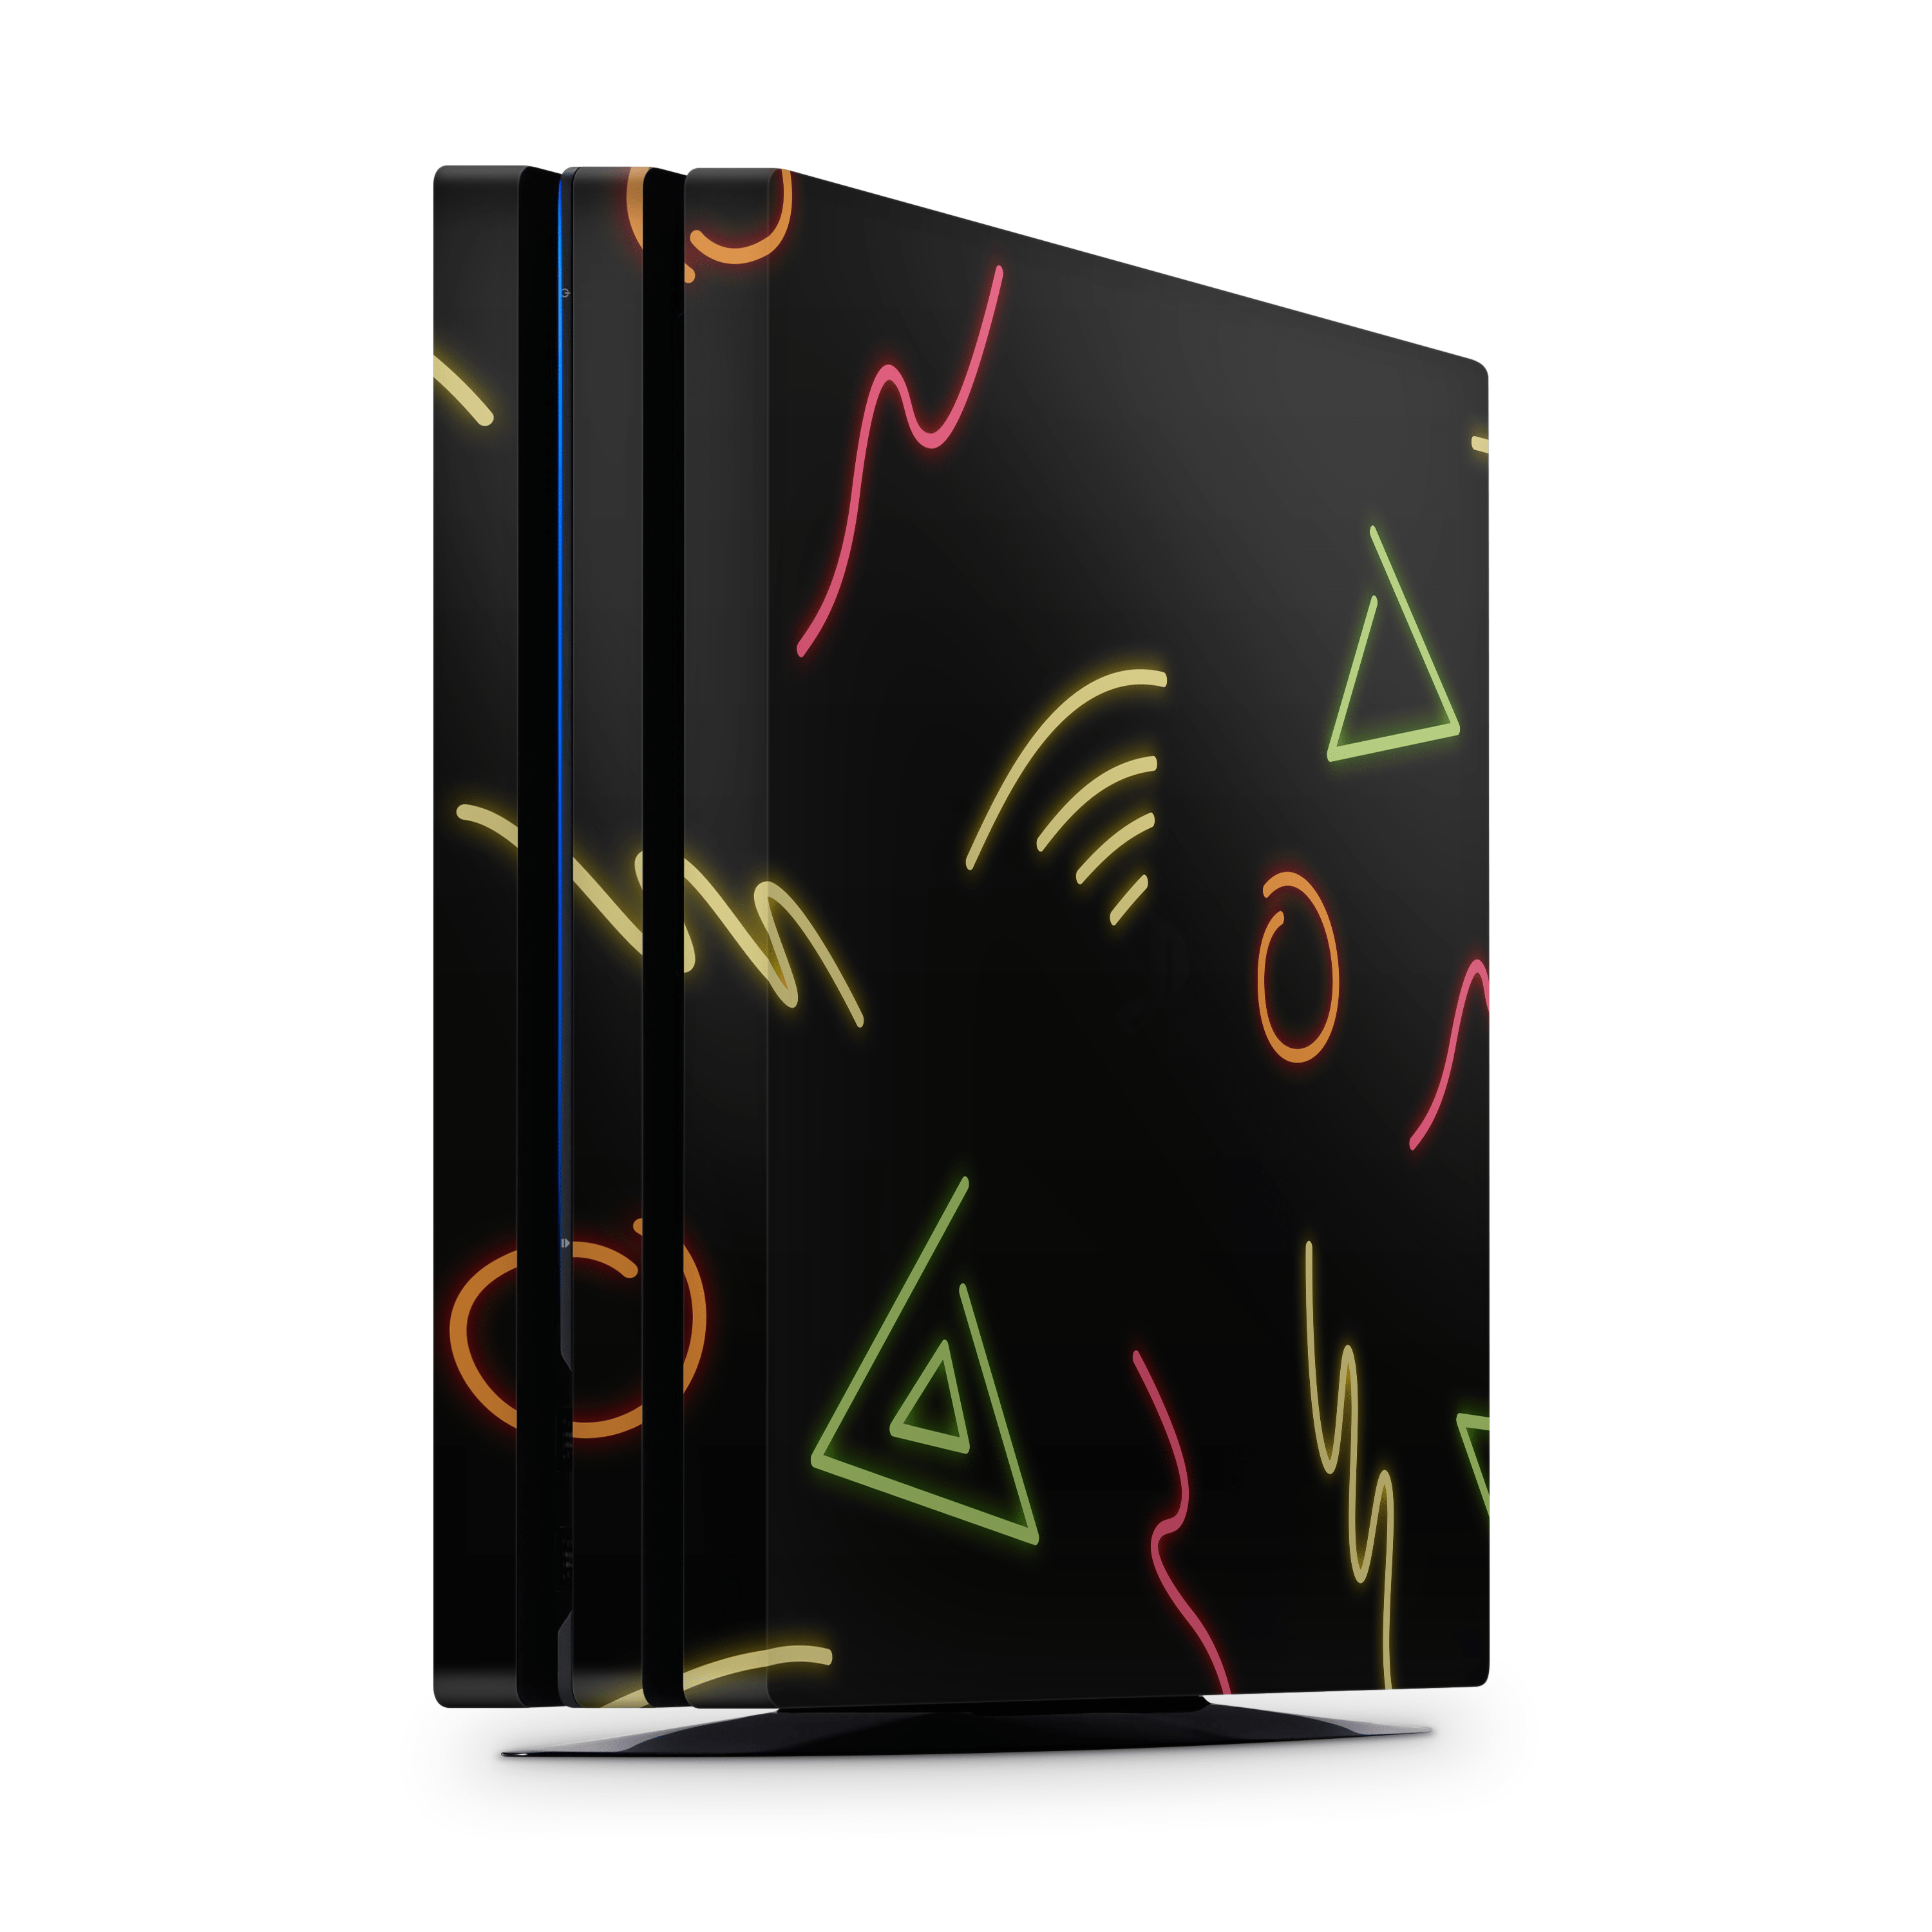 Warm Electric PS4 | PS4 Pro | PS4 Slim Skins